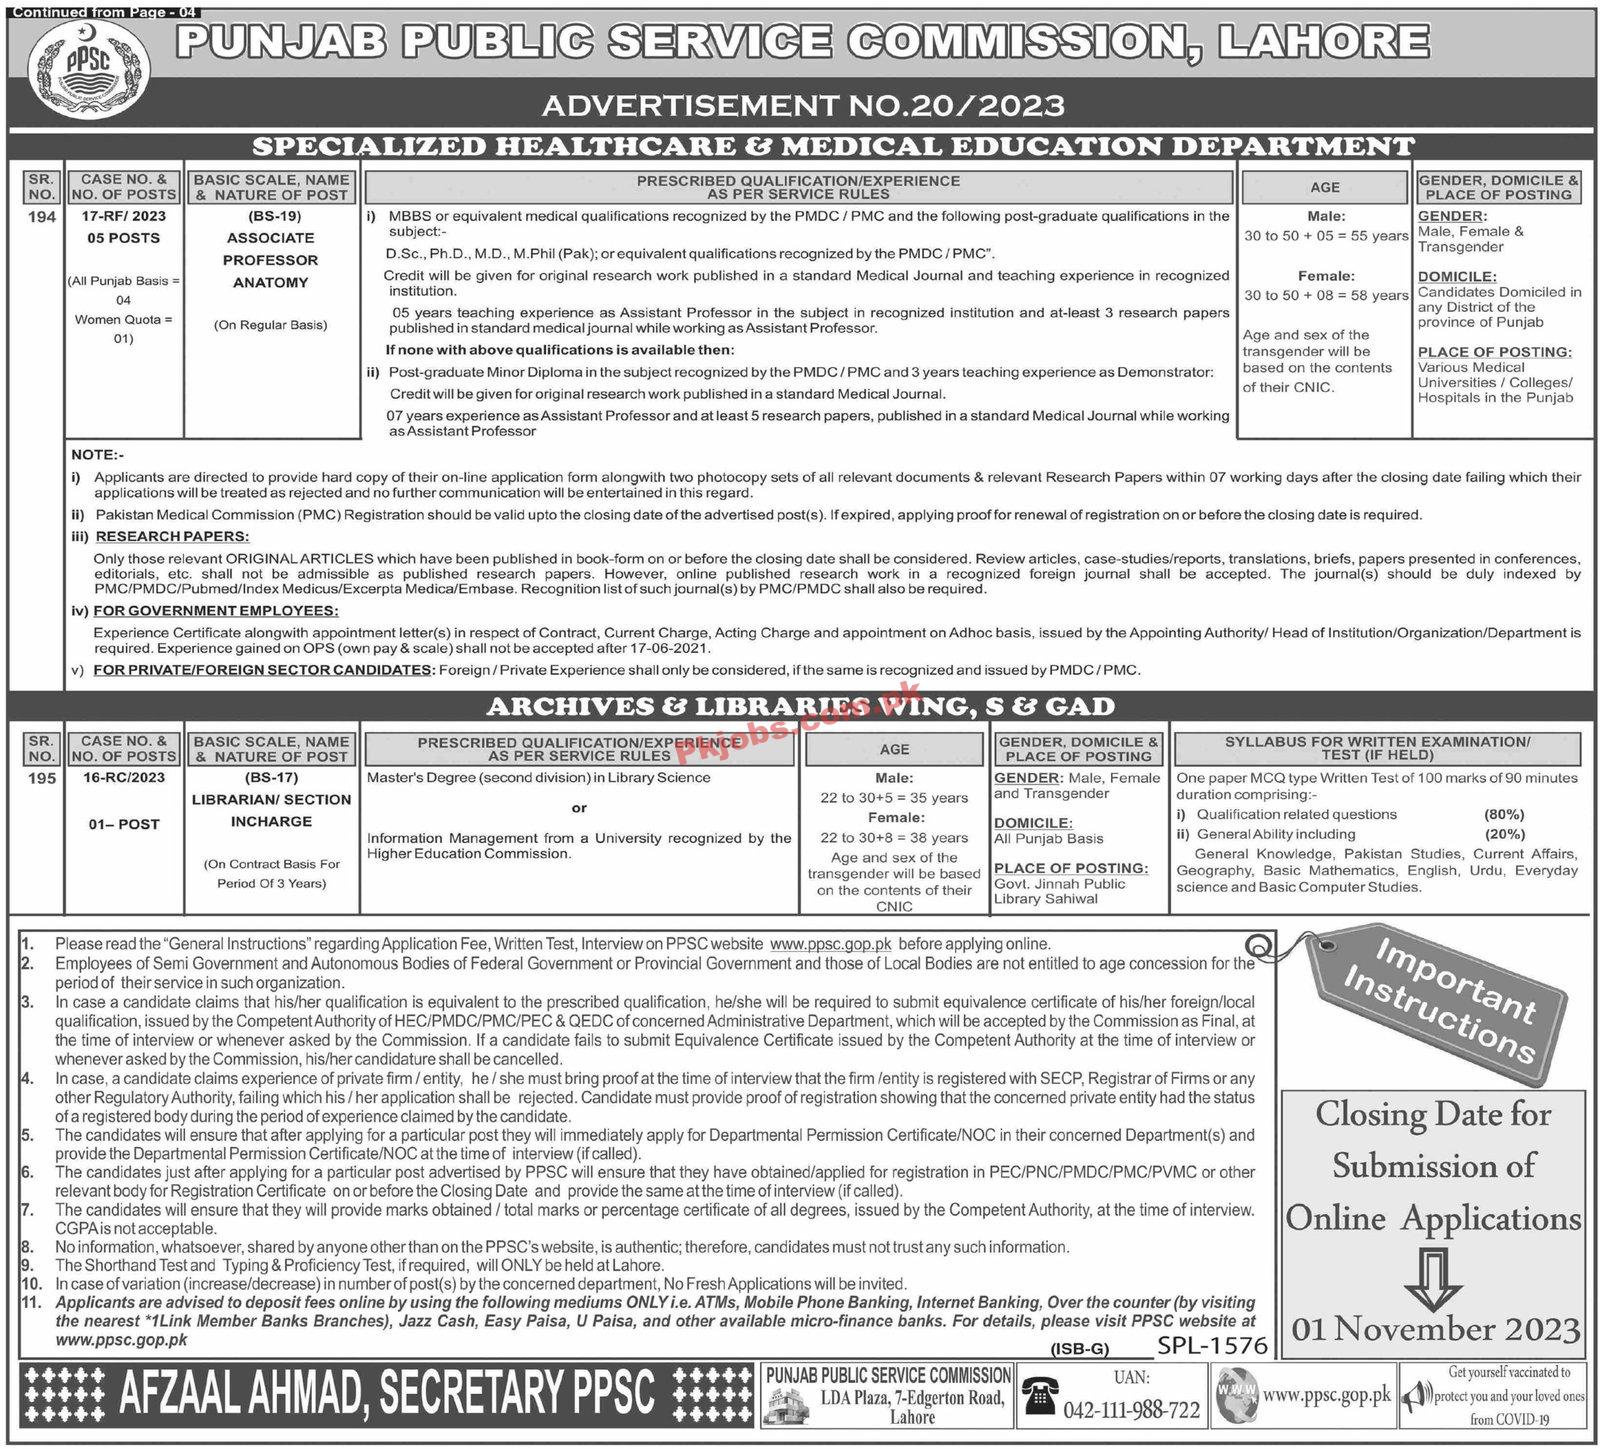 Latest PPSC Jobs | Jobs Available at Punjab Public Service Commission